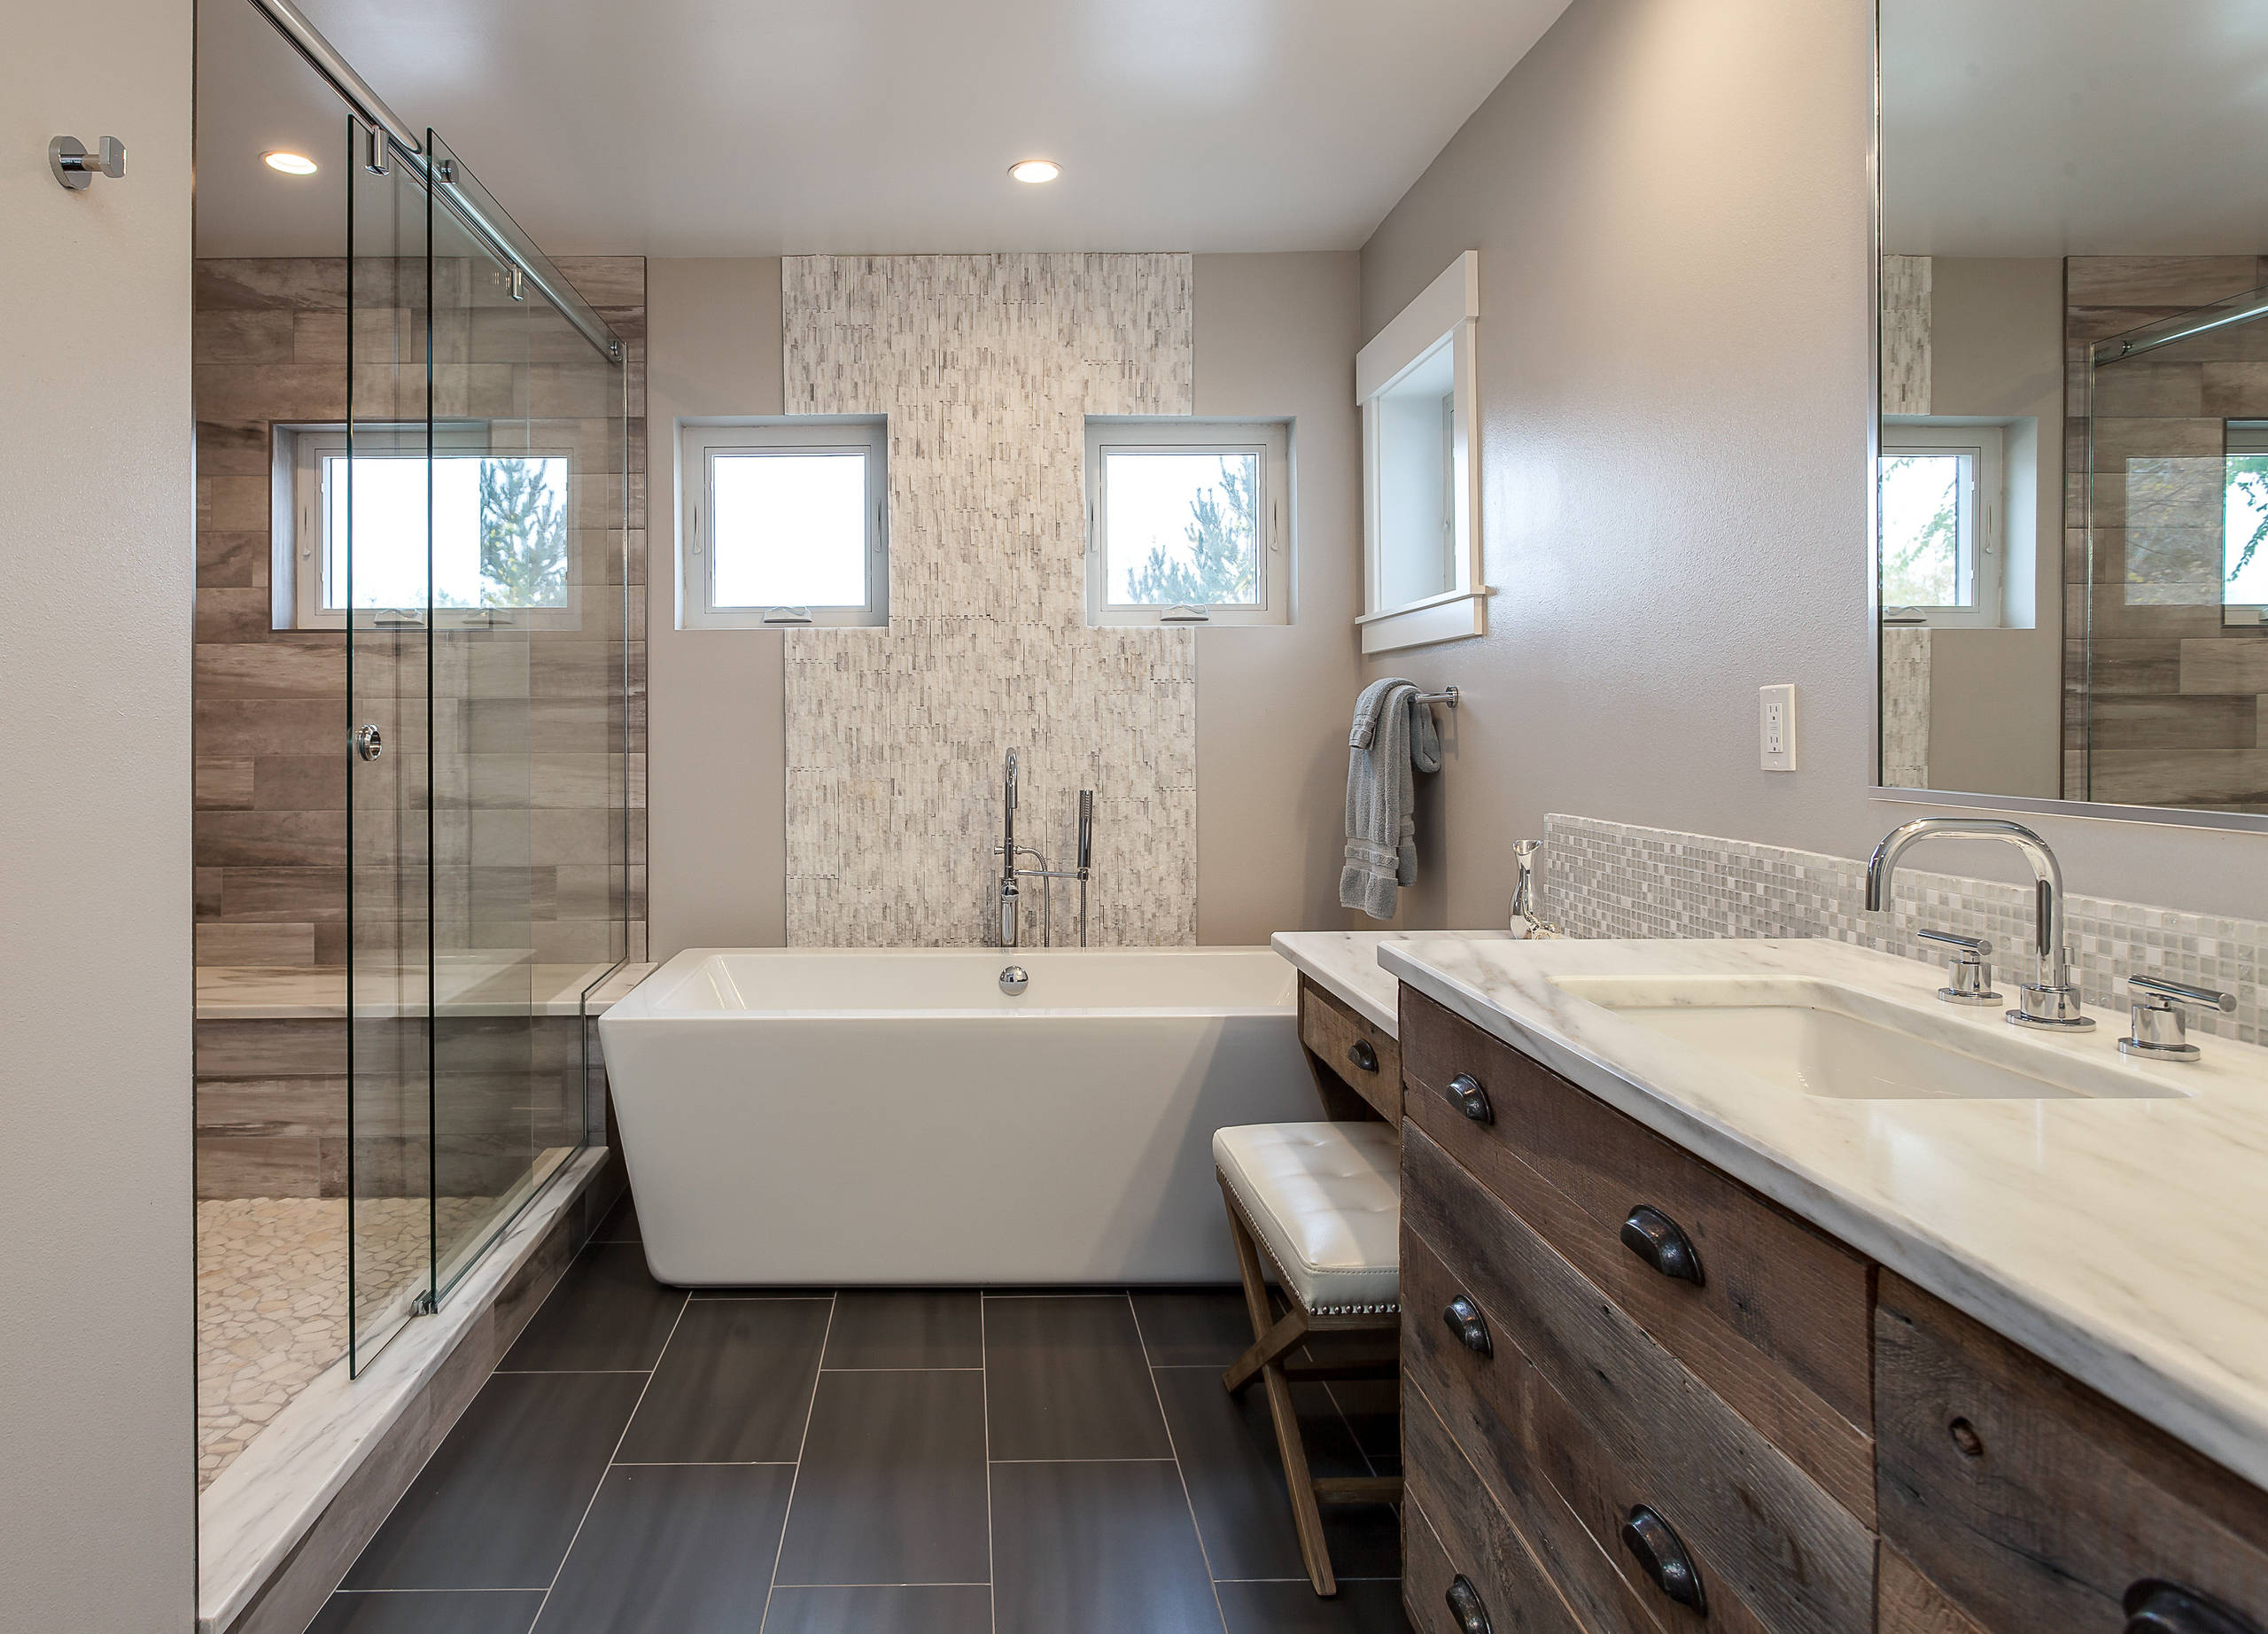 https://st.hzcdn.com/simgs/pictures/bathrooms/gorgeous-custom-bathroom-with-extra-large-shower-jm-kitchen-and-bath-design-img~61112d4d0771bf18_14-3750-1-743196a.jpg